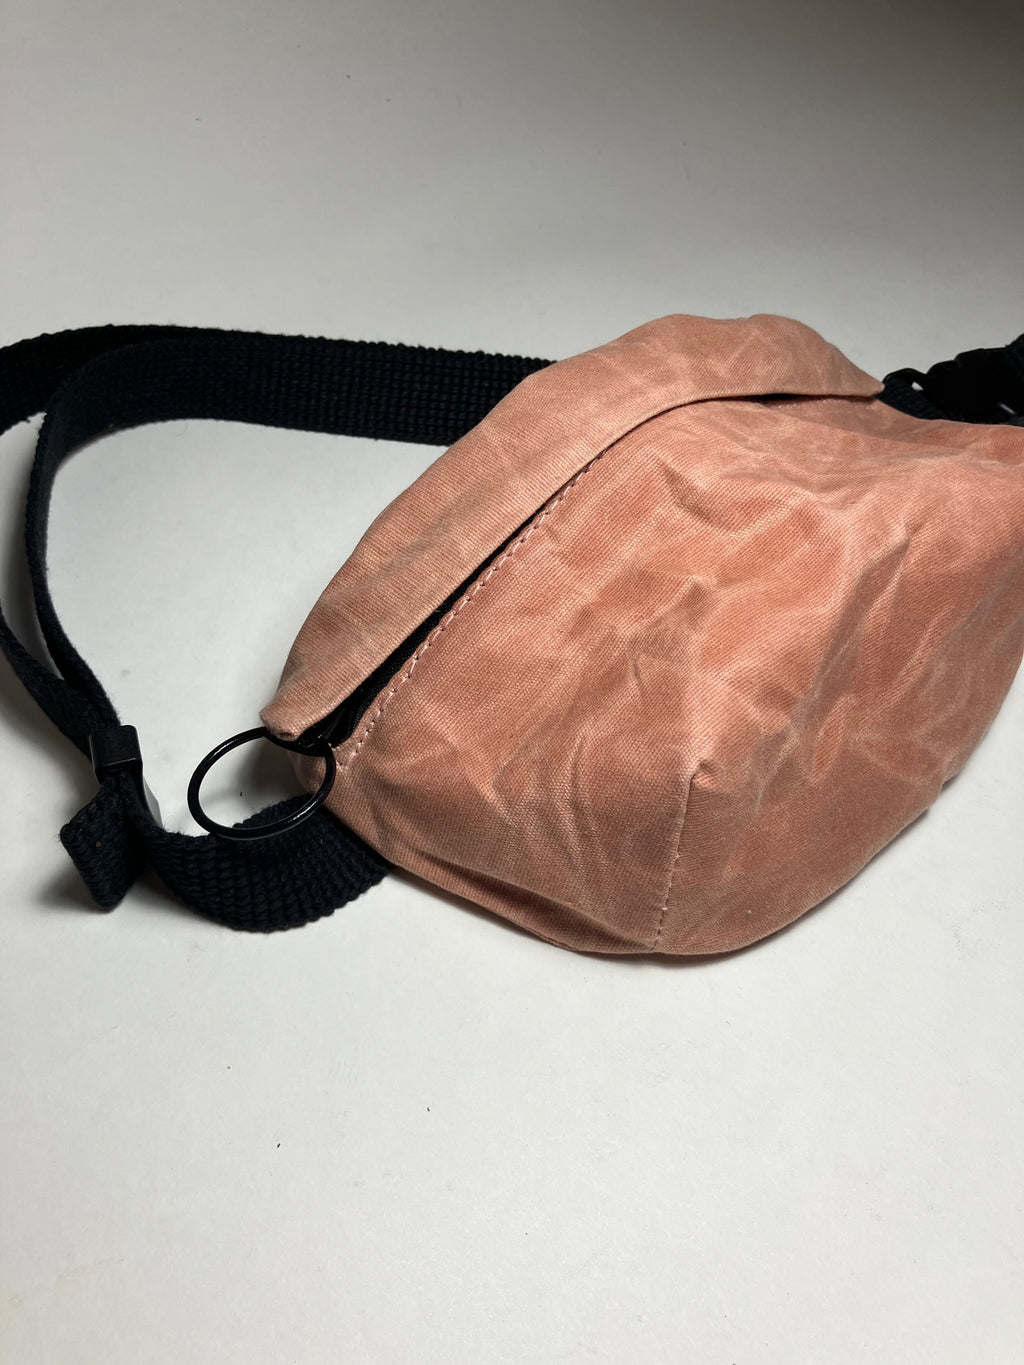 SAMPLE Fanny pack, pink waist bag, WAXED CANVAS FANNY PACK